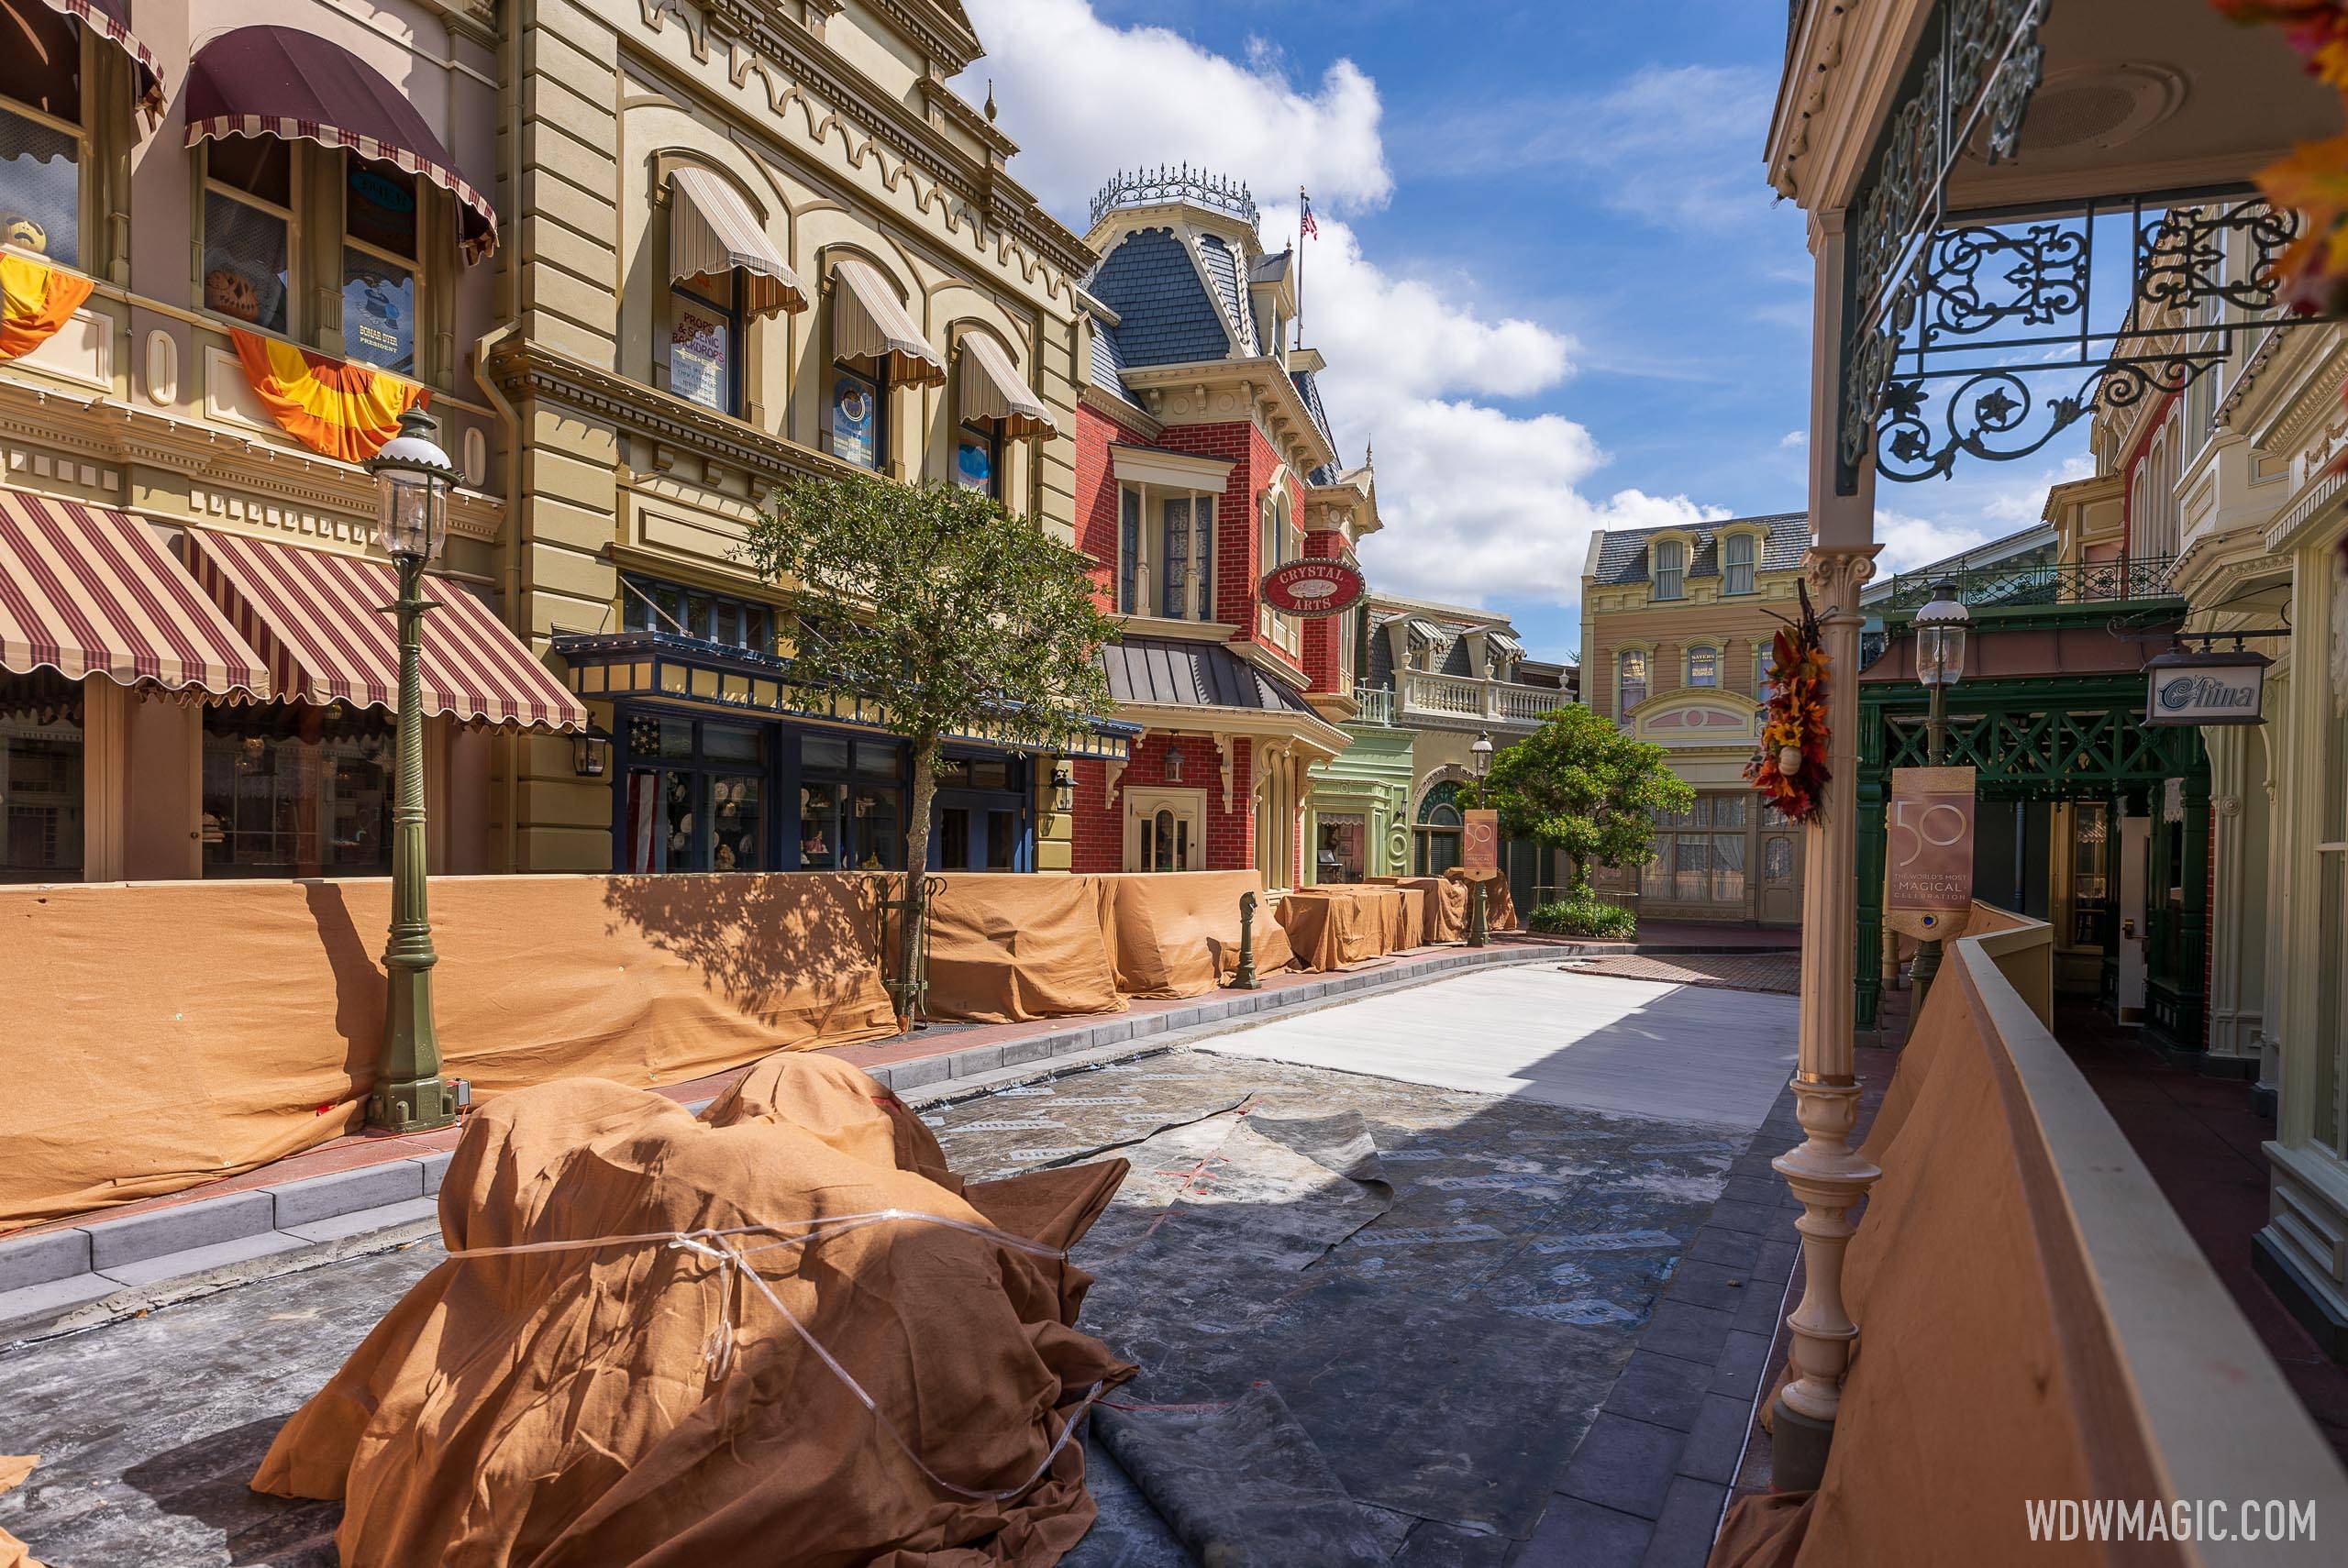 Center Street refurbishment continues at a very slow pace on Main Street U.S.A. at Magic Kingdom